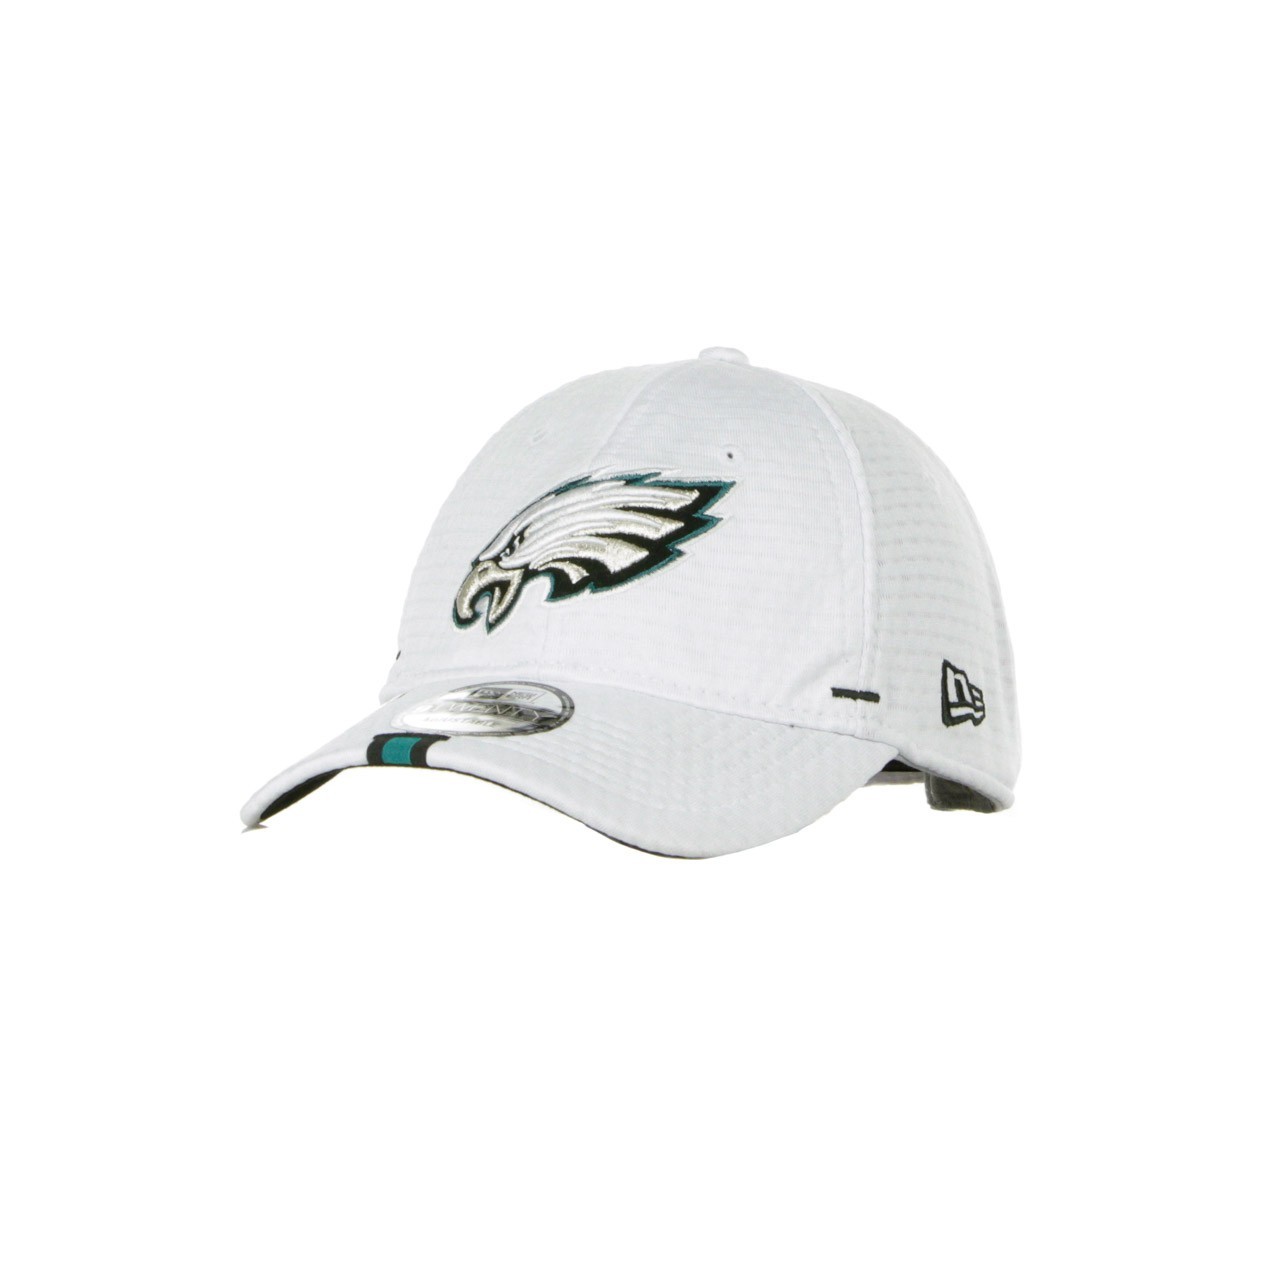 NEW ERA 920 OFFICIAL NFL 19 TRAINING CAMP PHIEAG 12024071